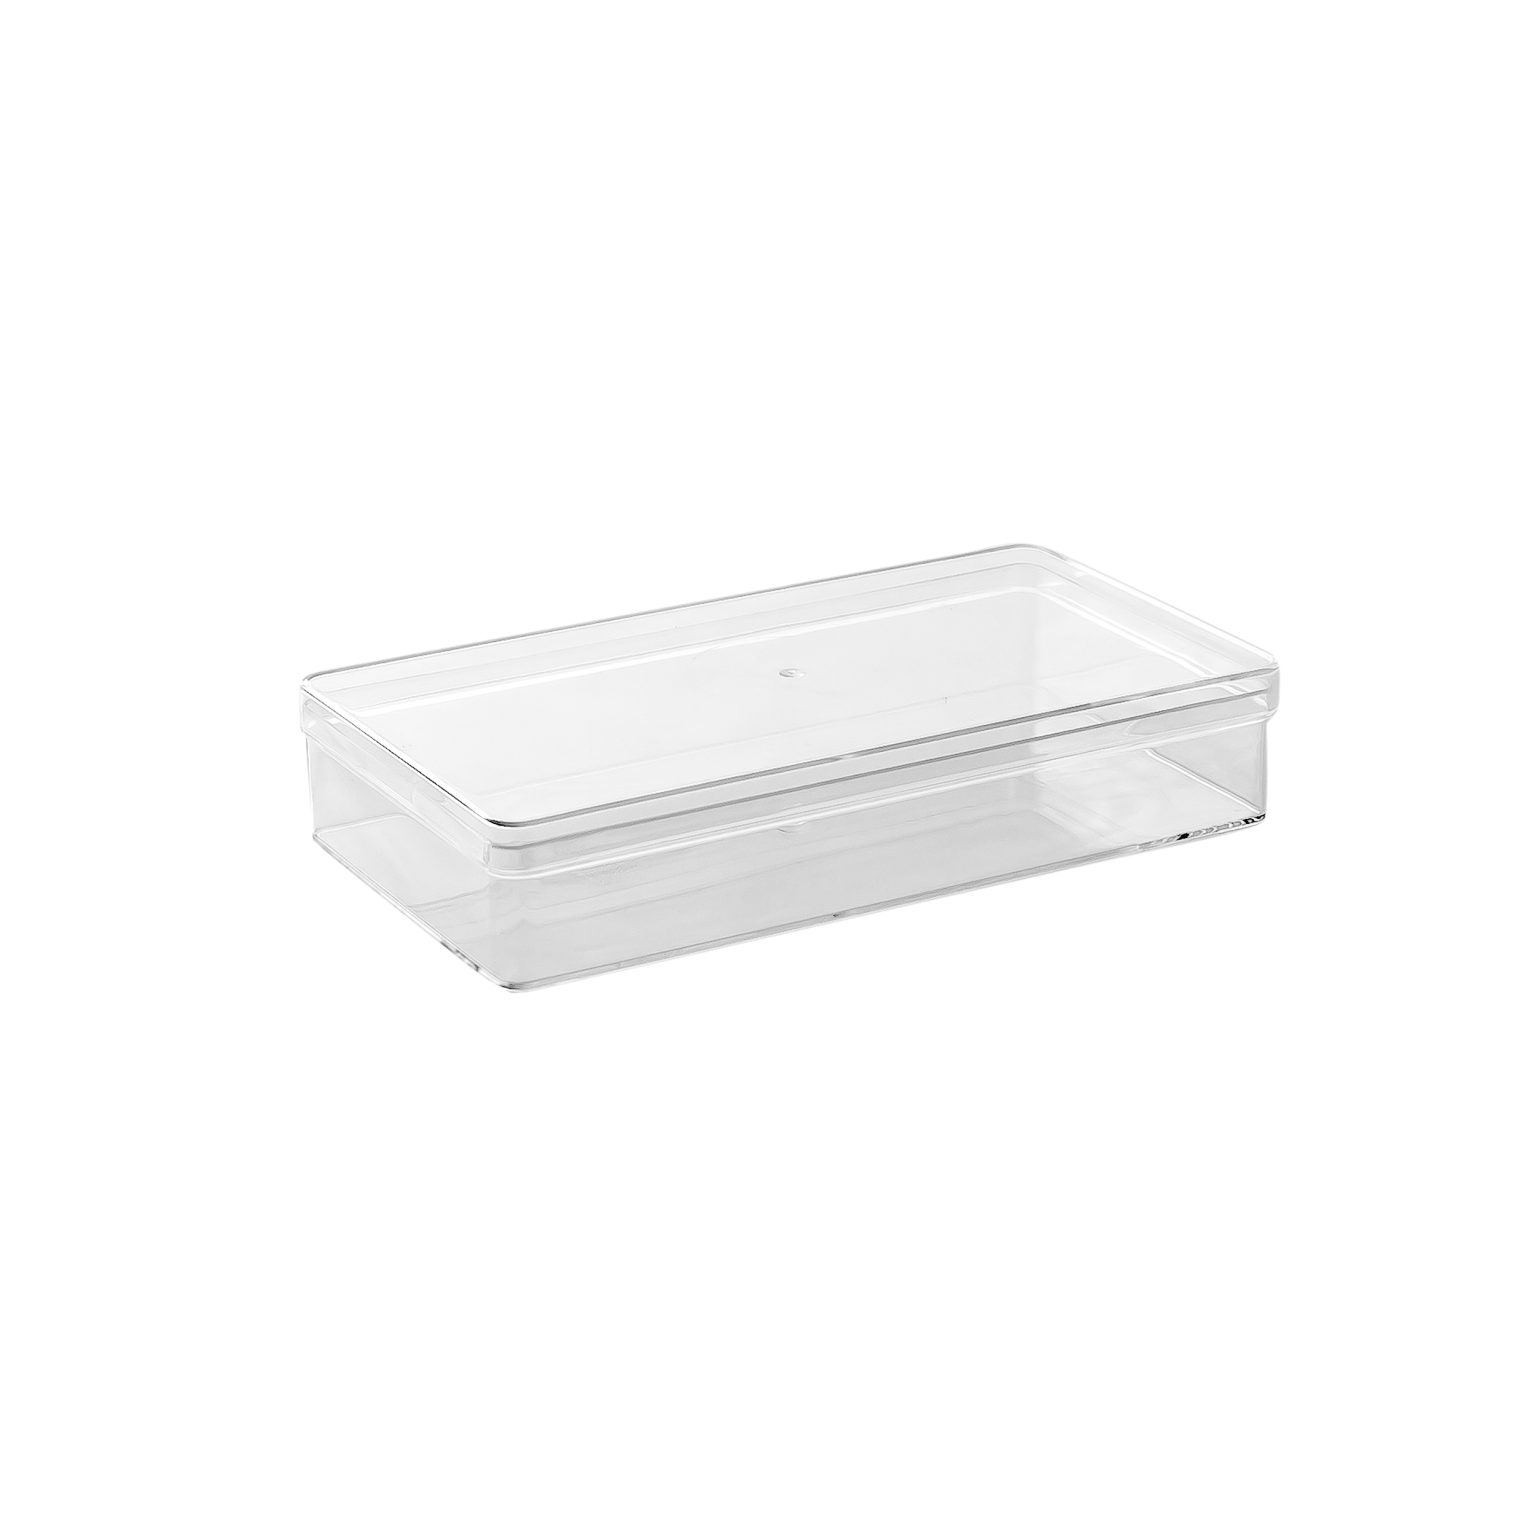 RETAIL-PLASTIC CONTAINER RECTANGLE CLEAR- 649 (0.25KG)- 1 PIECE ...